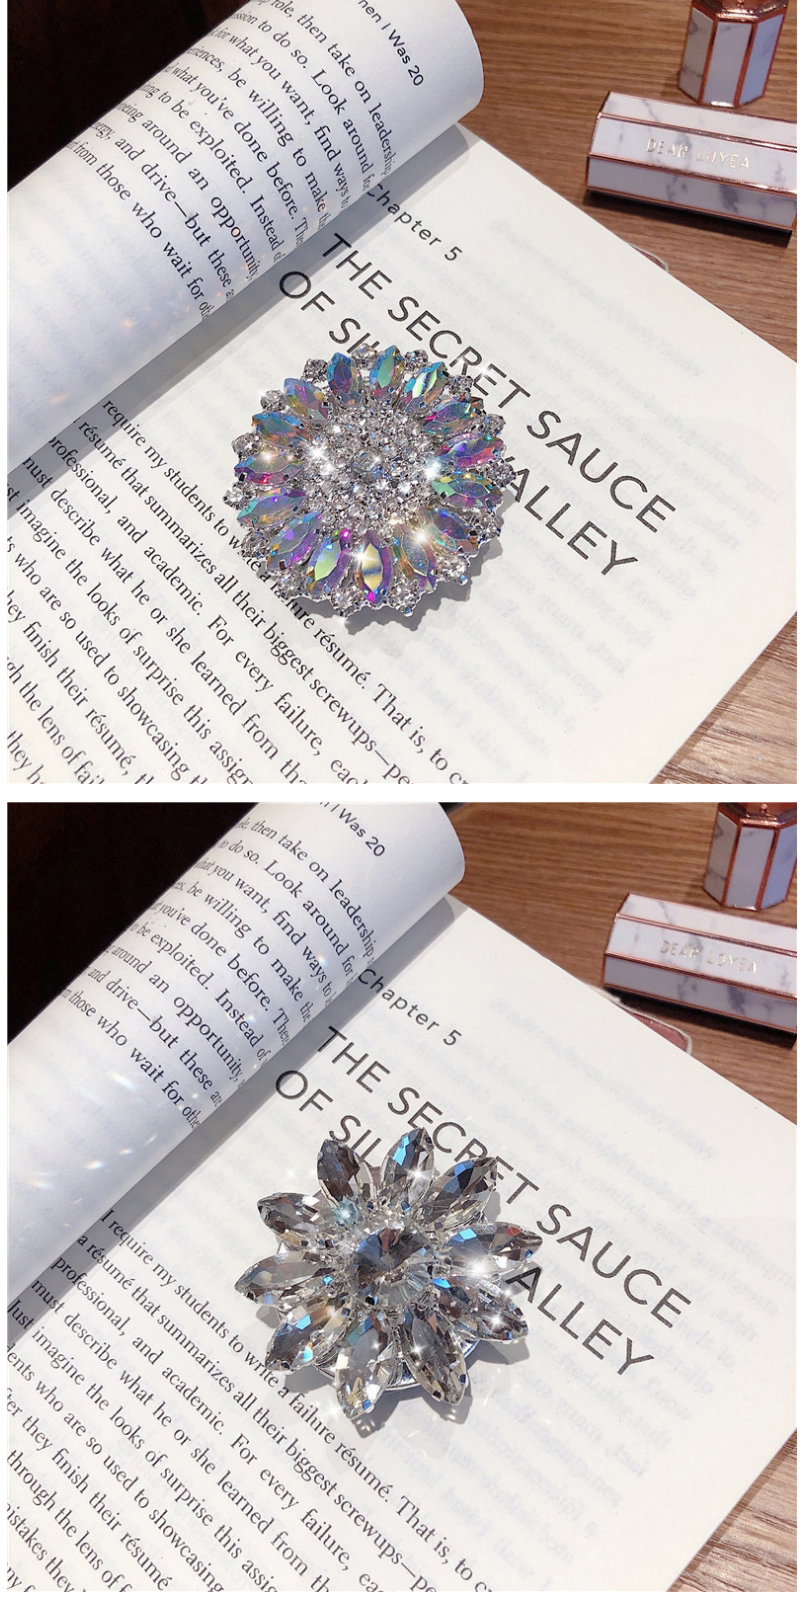 Fashion No. 3 Colorful Full Diamond-silver Color Bottom Jeweled Cubic Crystal Stand Ring Clasp,Phone Hlder